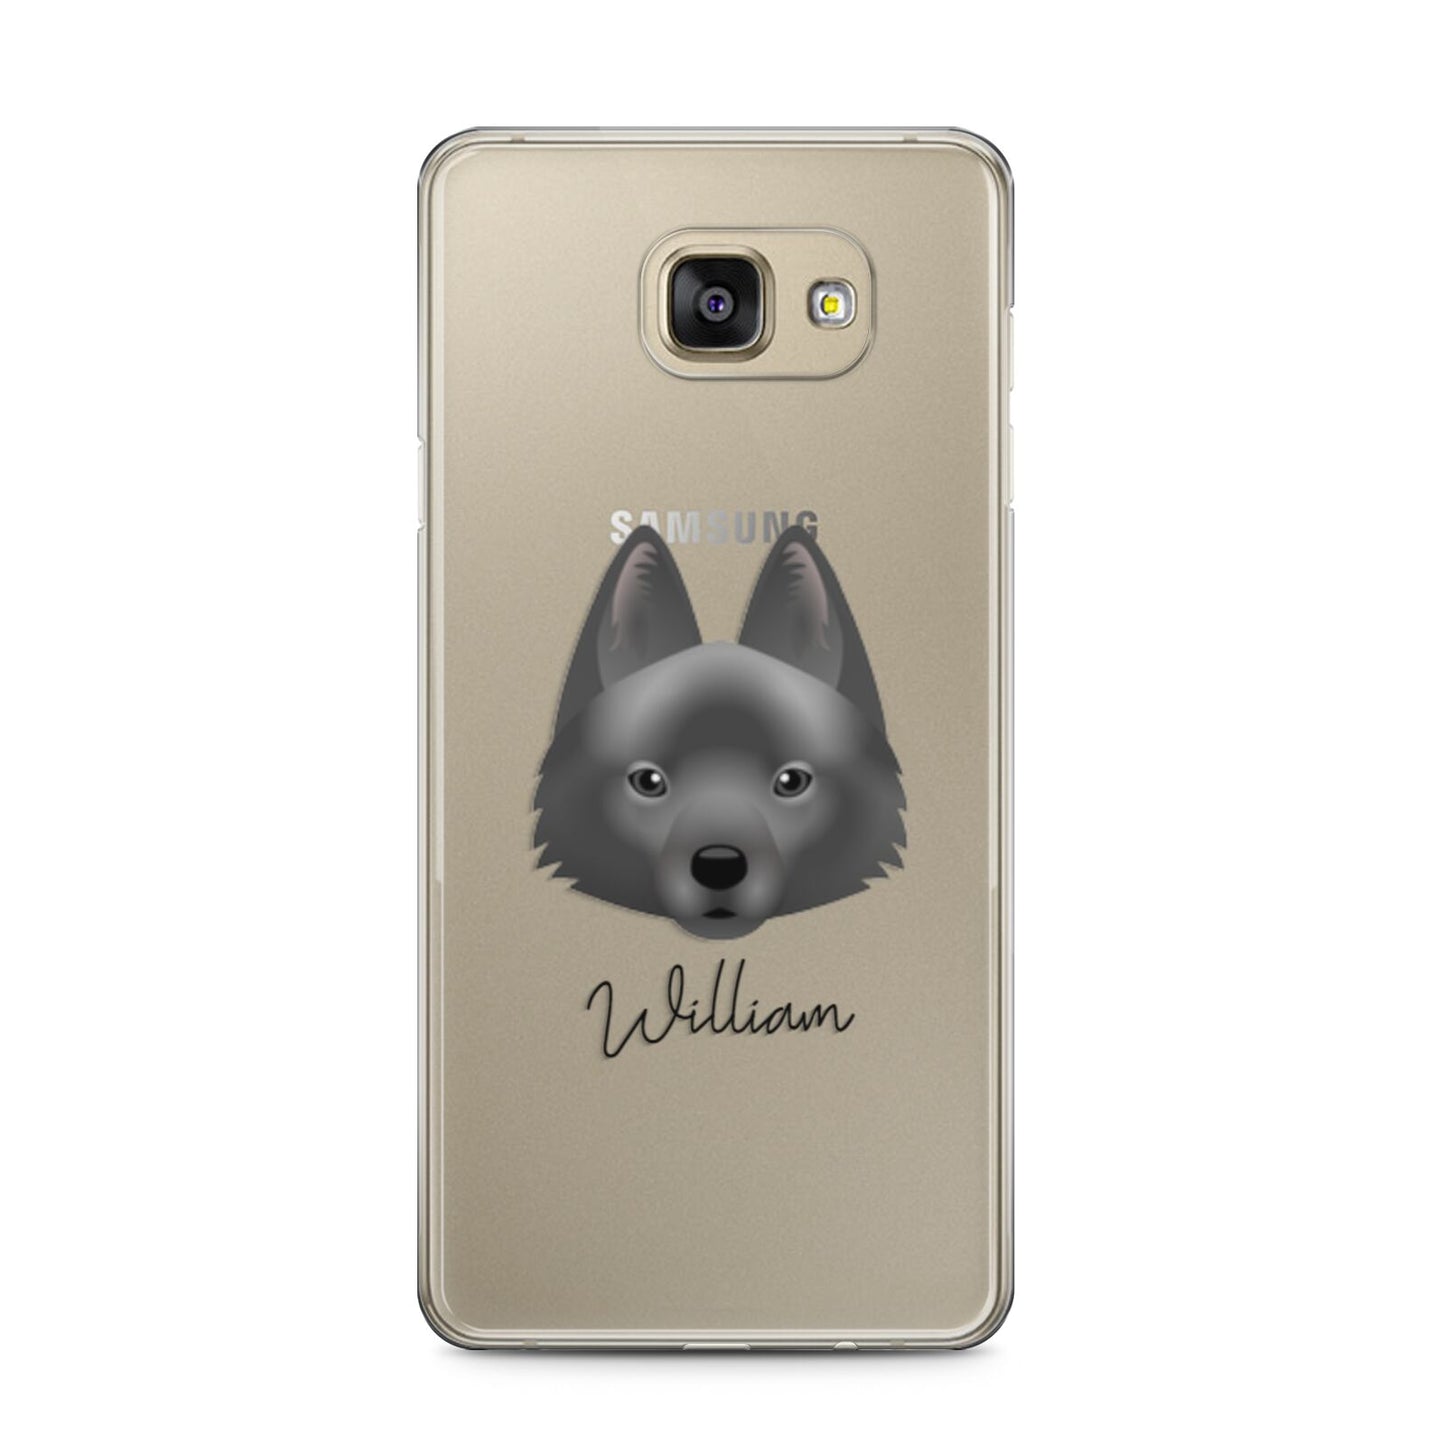 Schipperke Personalised Samsung Galaxy A5 2016 Case on gold phone